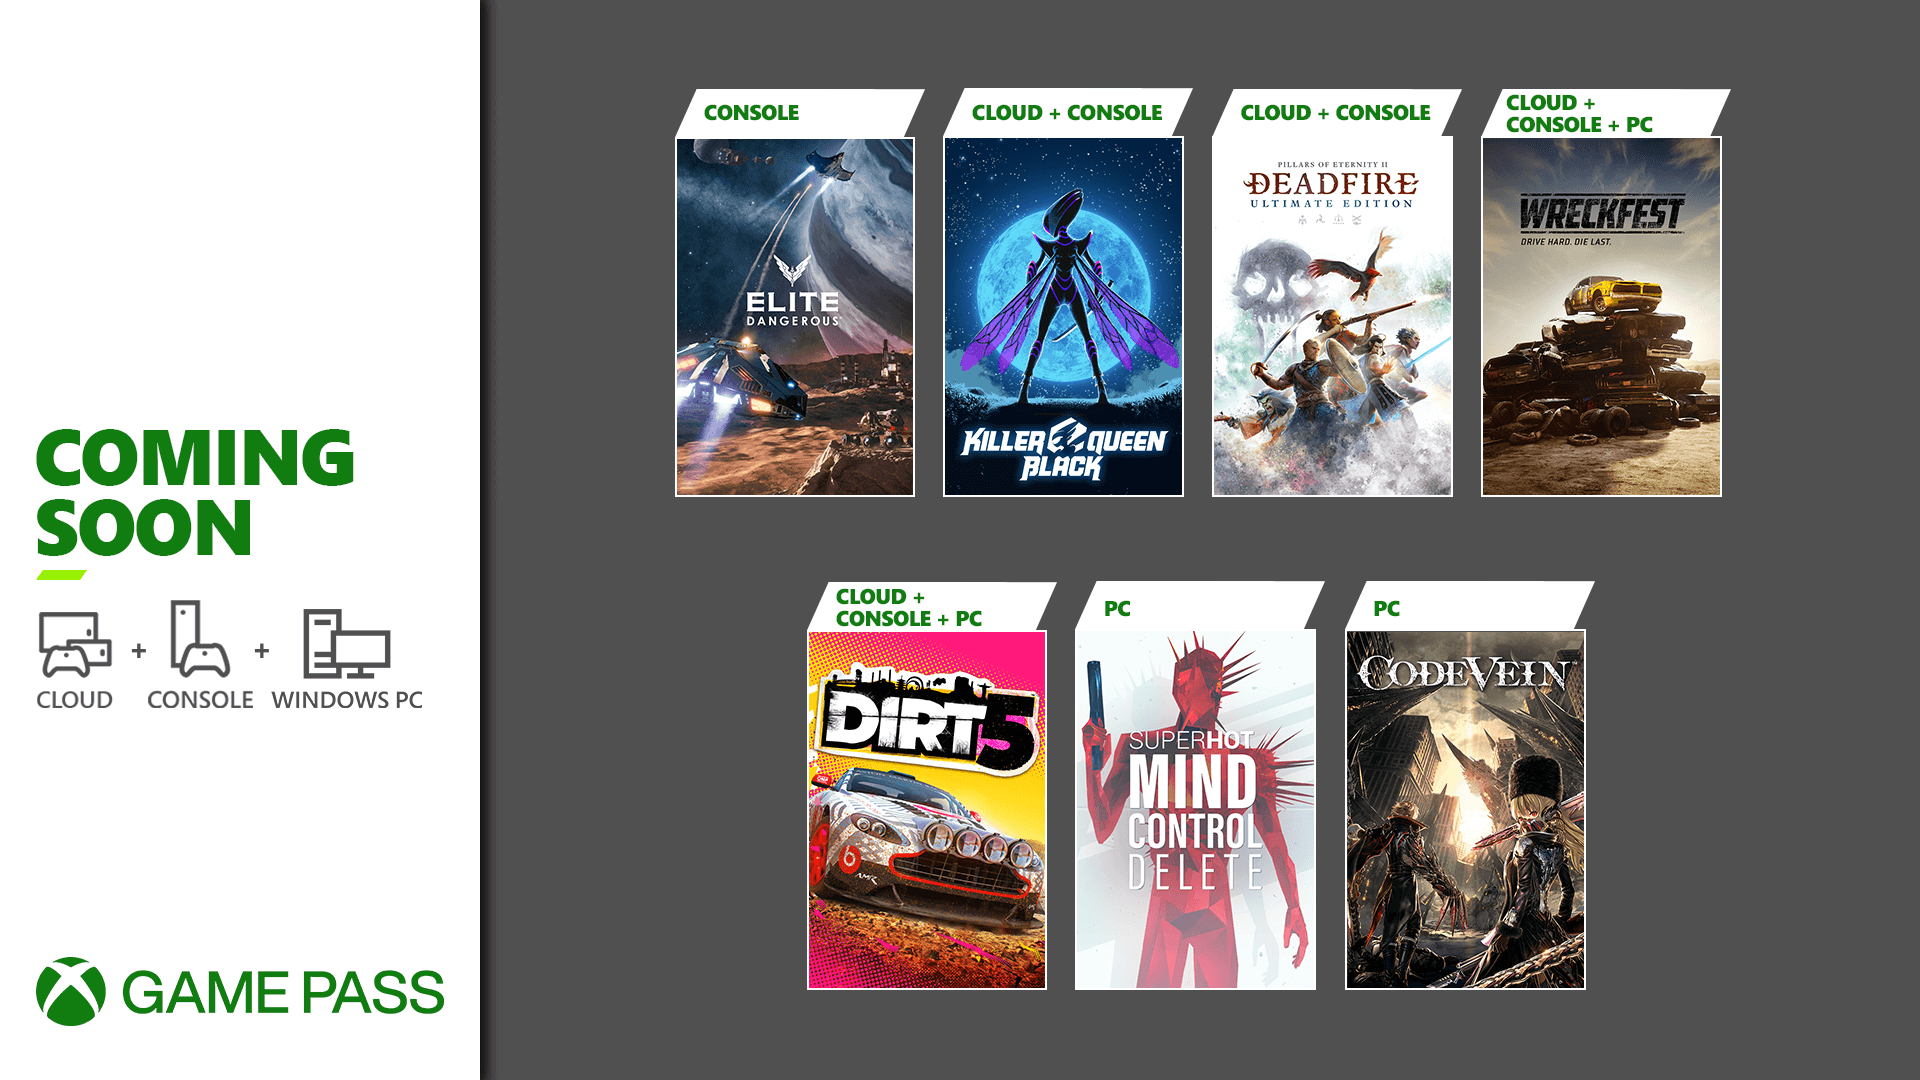 xbox game pass pc games coming soon